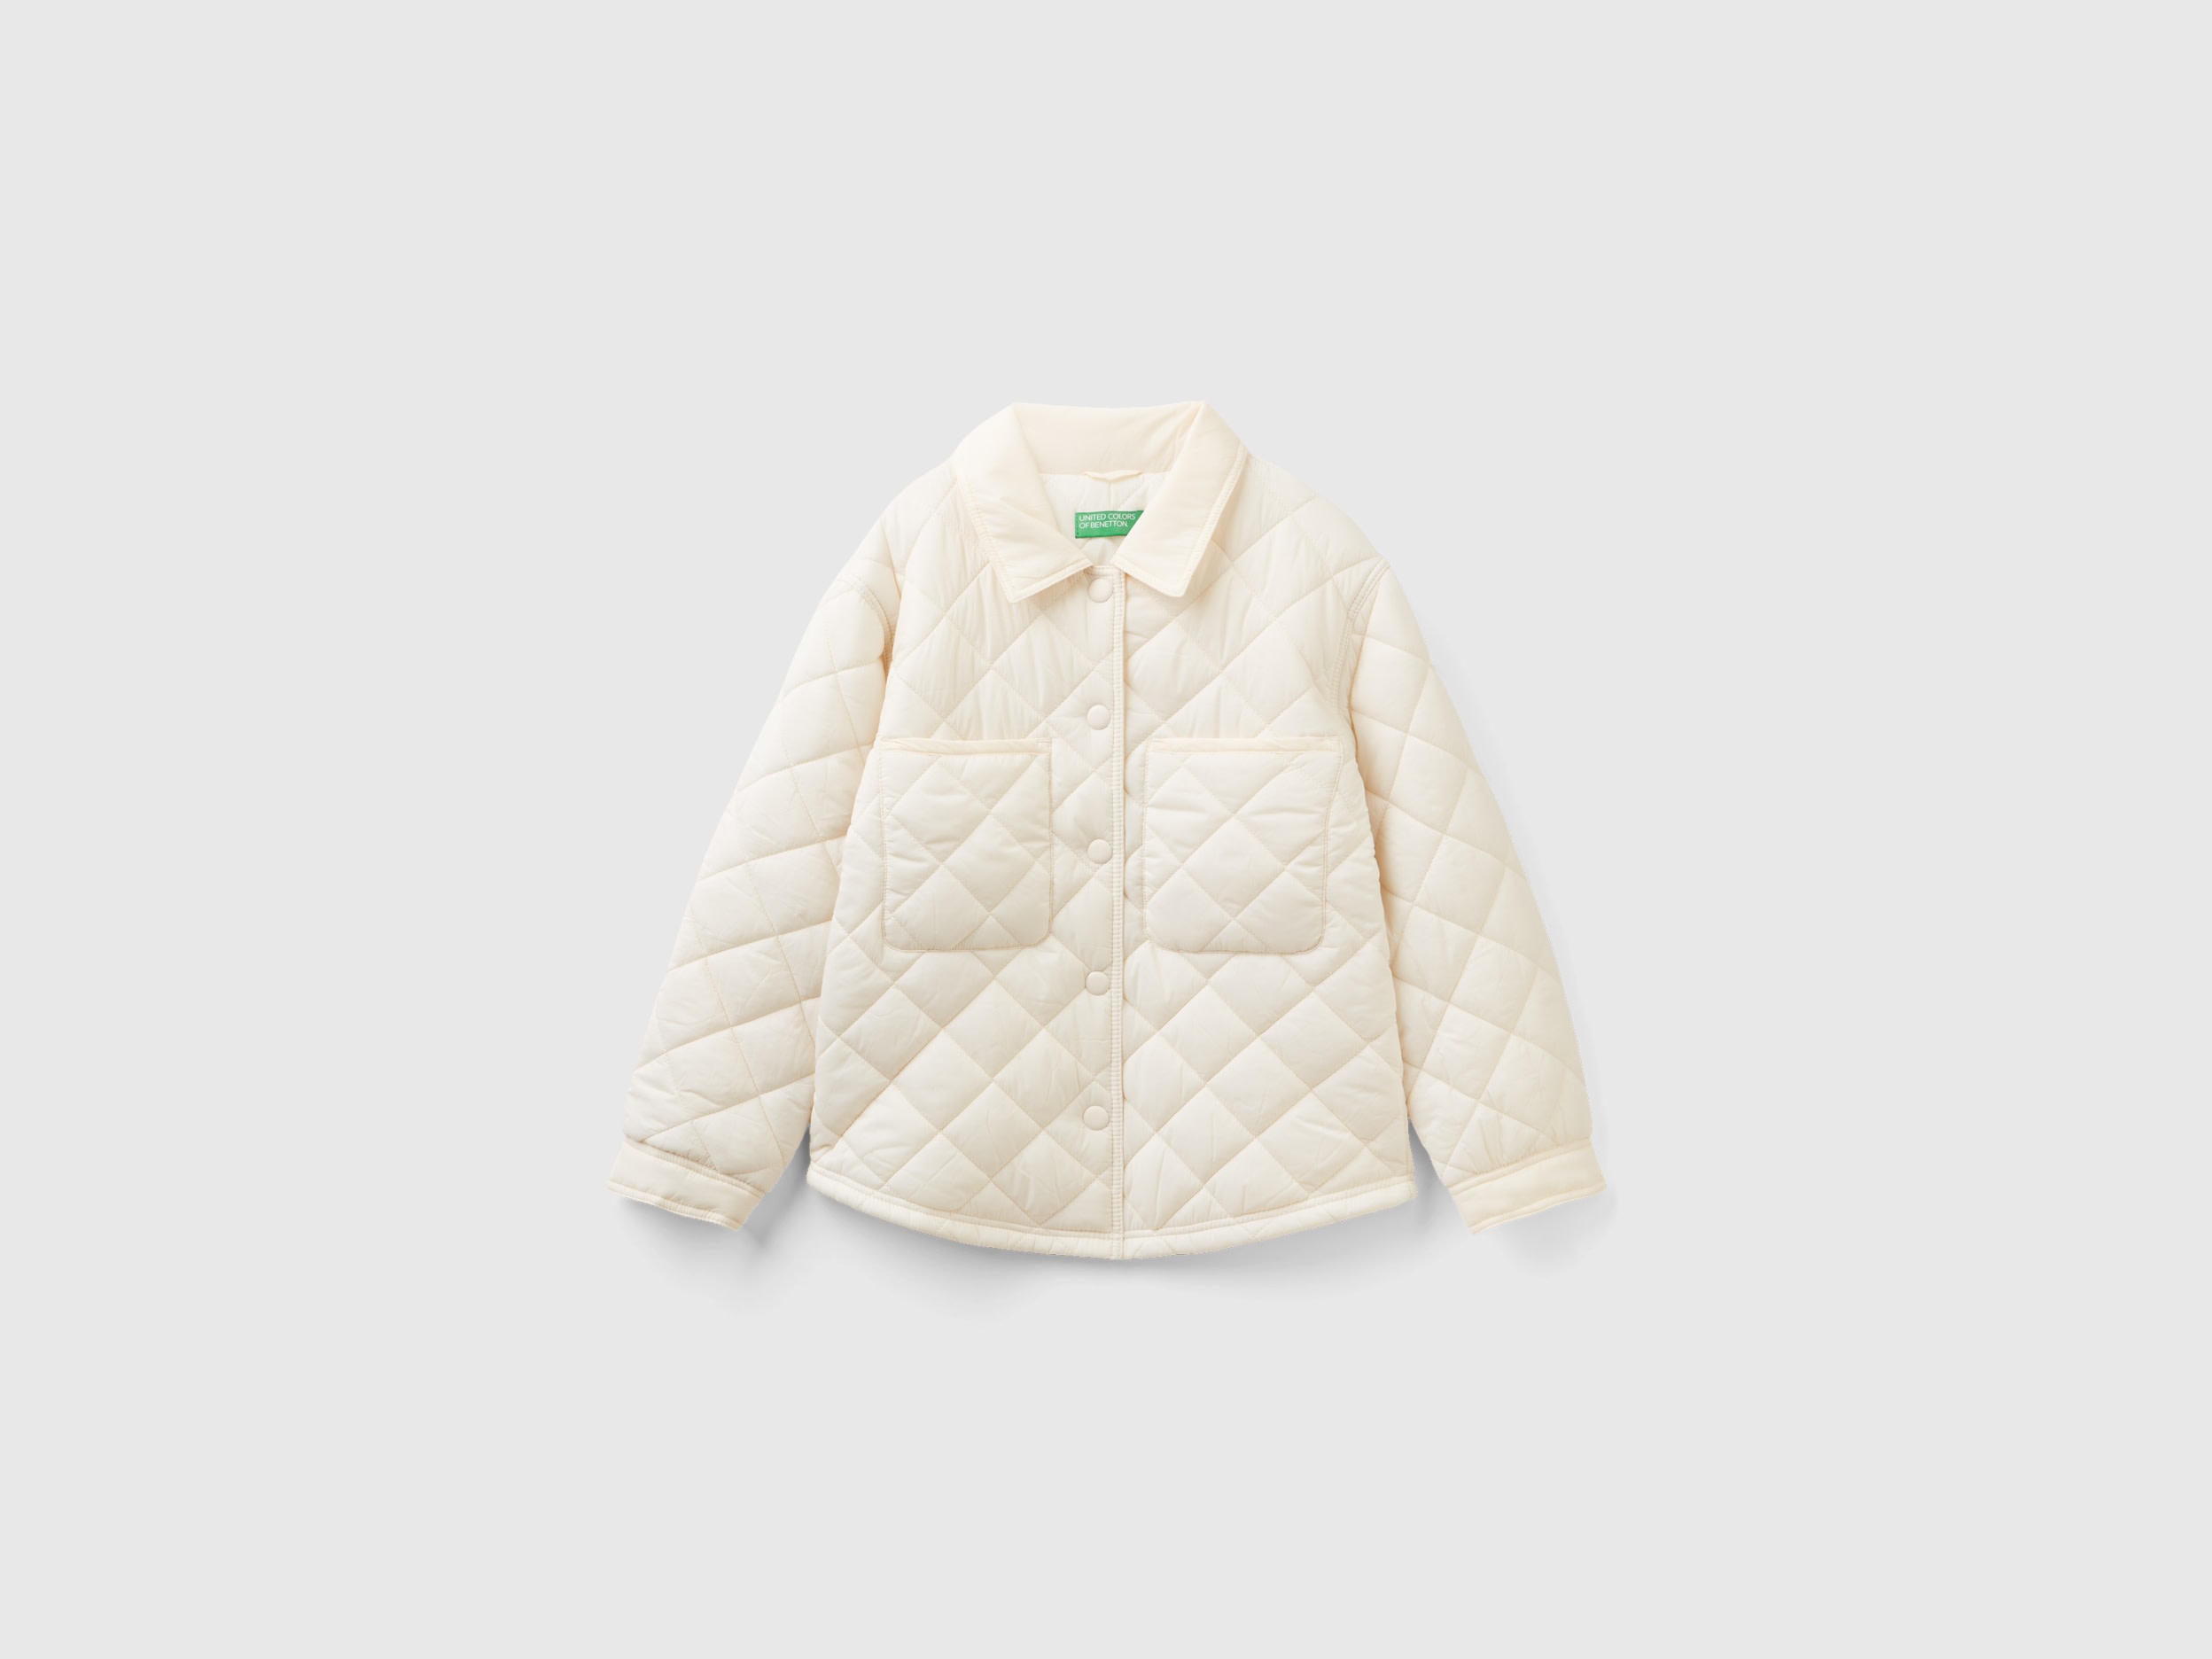 Benetton, Light Quilted Jacket, size 3XL, Creamy White, Kids